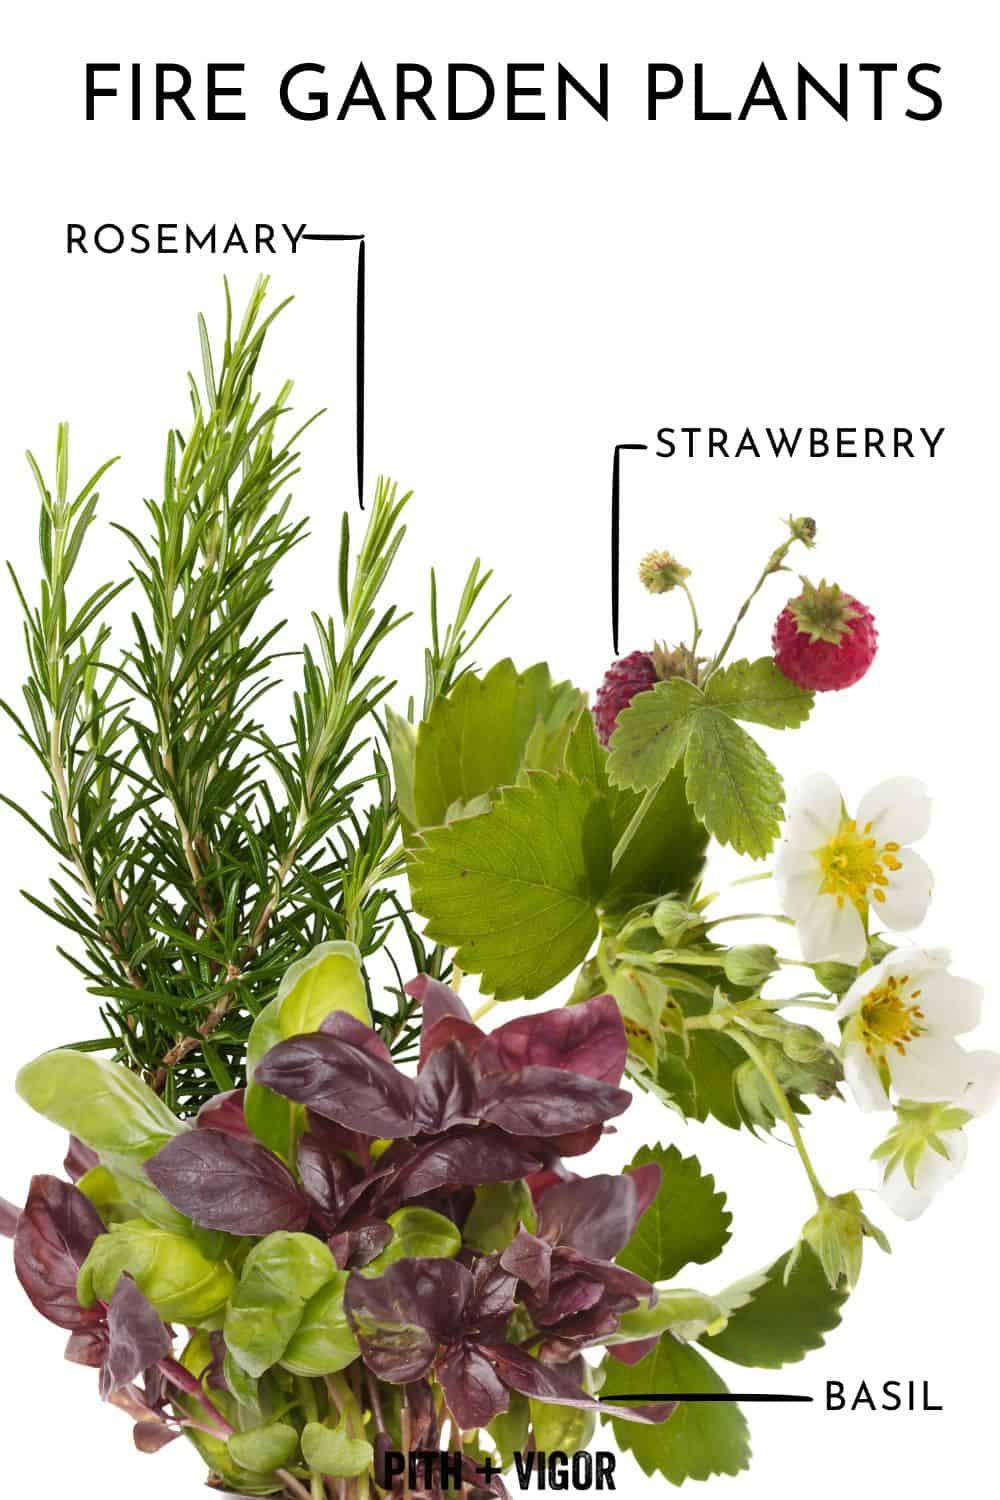 An image featuring labeled garden plants against a white background. The plants include rosemary with its needle-like leaves, strawberry with its red berries and white flowers, and basil with its green and purple leaves. The label "FIRE GARDEN PLANTS" is at the top, perfect for a serene backyard yoga space.